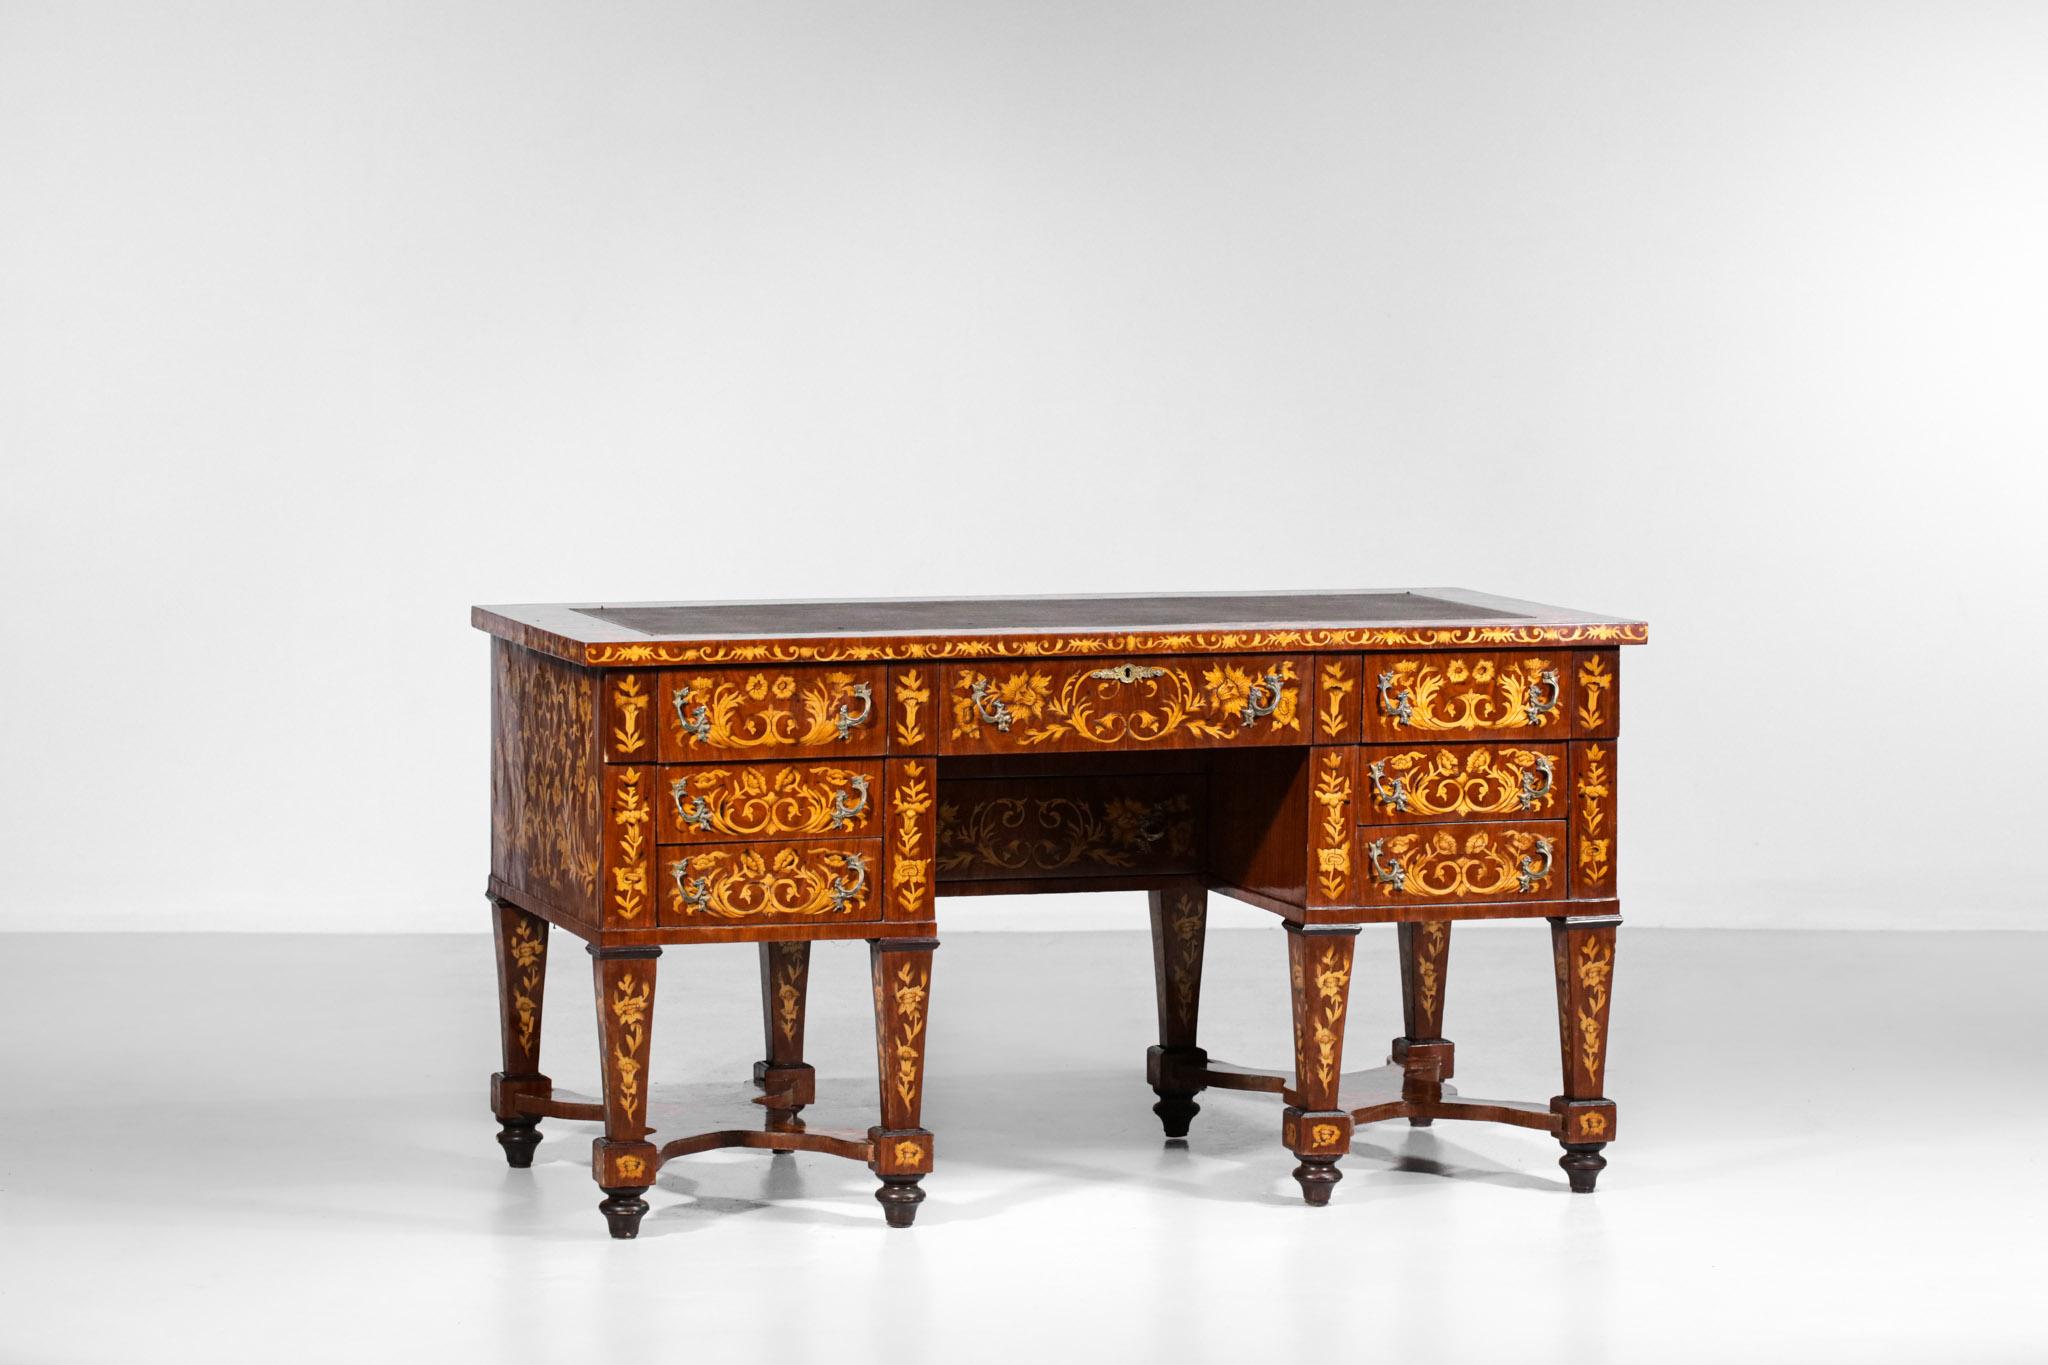 Mid-20th Century Mazarin Style Desk in Solid Wood and Floral Marquetry, F419